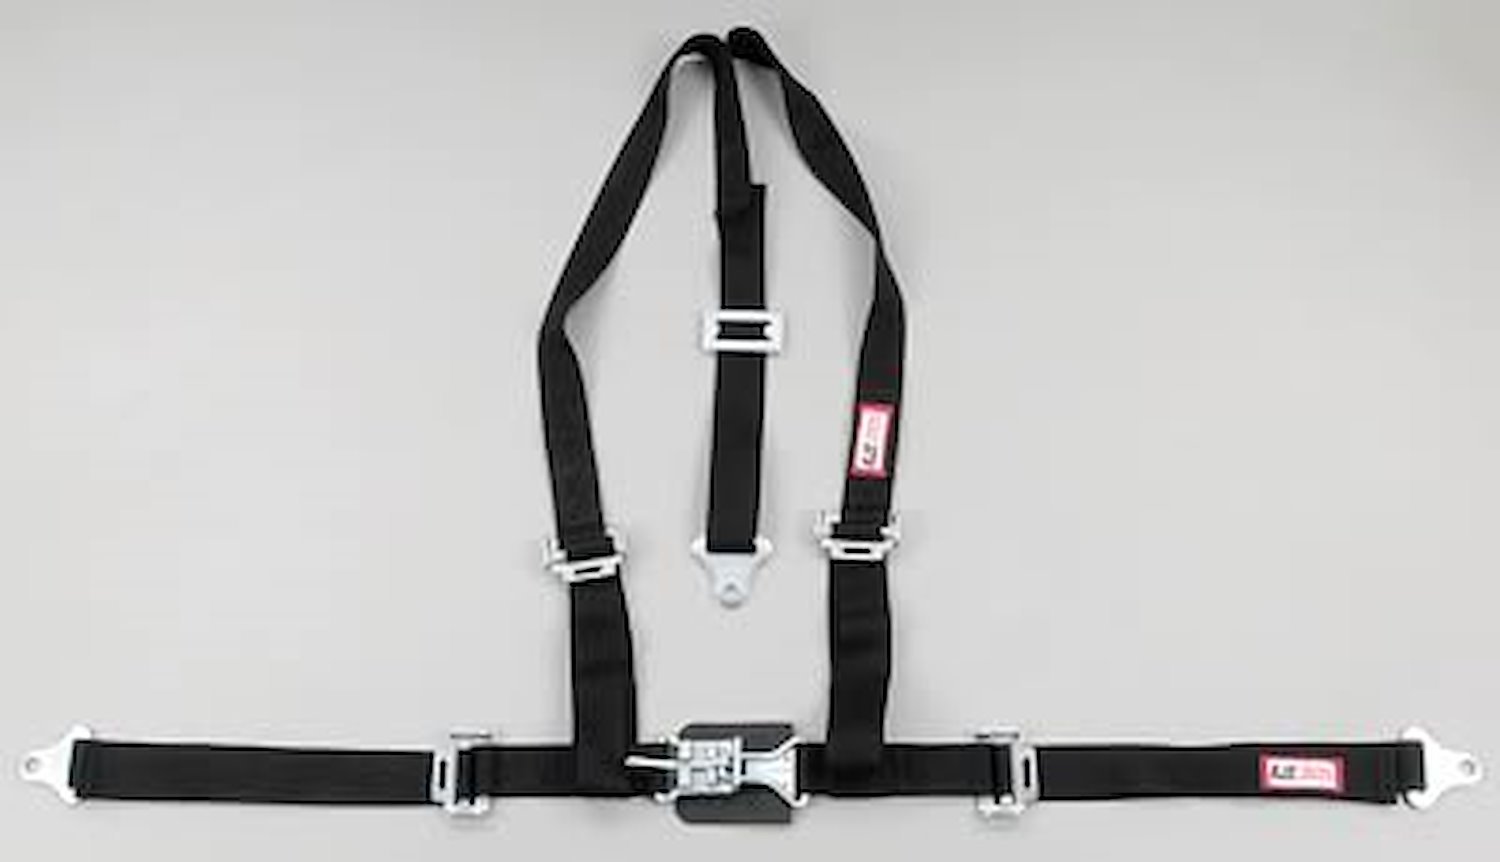 NON-SFI L&L HARNESS 3 PULL DOWN Lap Belt SEWN IN 2 S.H. Individual FLOOR Mount w/STERNUM STRAP ALL WRAP ENDS YELLOW